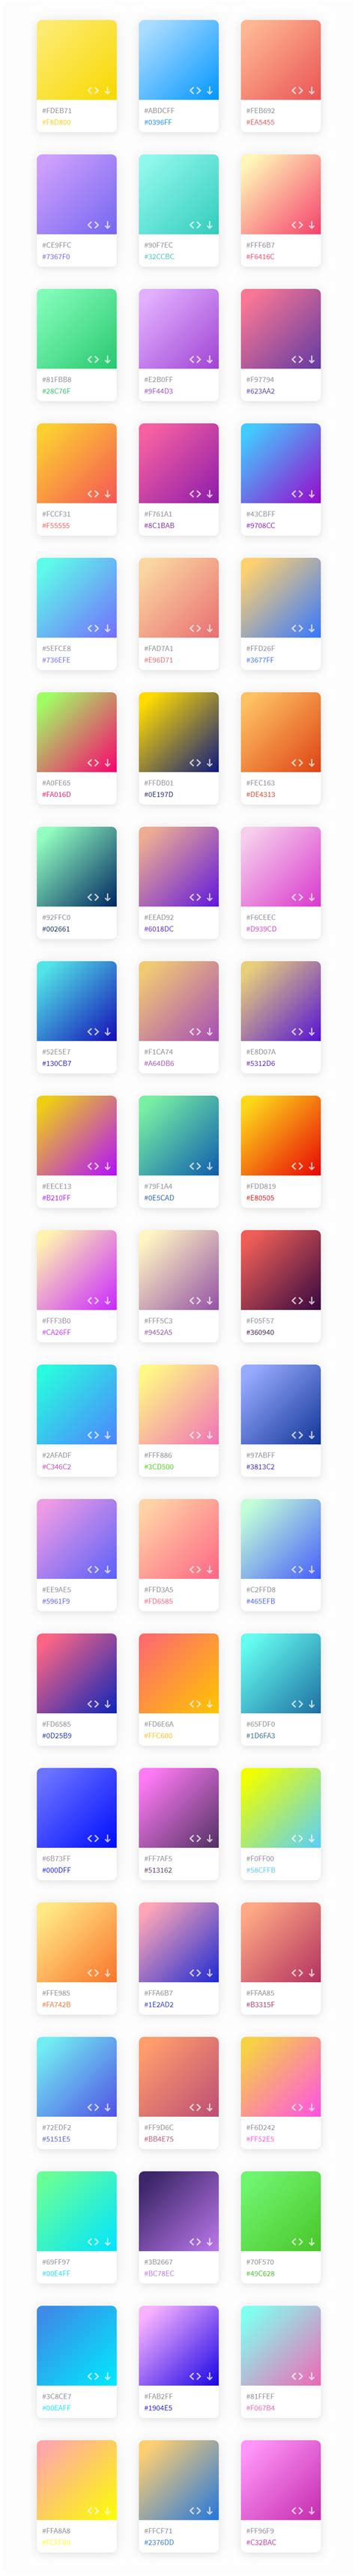 Coolhue Coolest Gradient Hues And Swatches Css Grd Sketch Bypeople